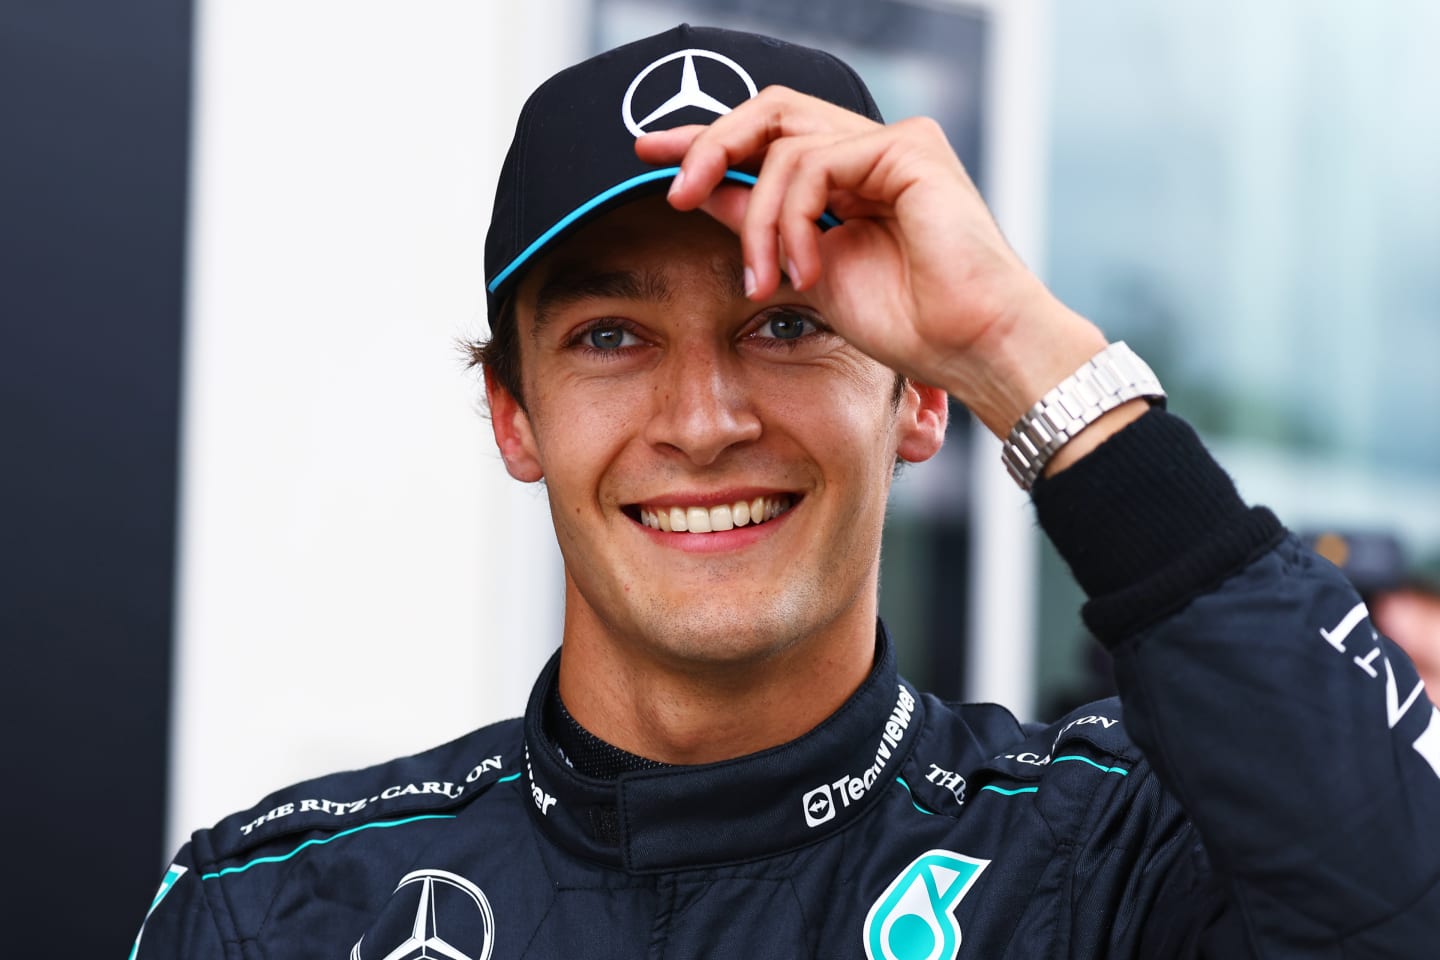 MONTREAL, QUEBEC - JUNE 08: Pole position qualifier George Russell of Great Britain and Mercedes looks on in parc ferme during qualifying ahead of the F1 Grand Prix of Canada at Circuit Gilles Villeneuve on June 08, 2024 in Montreal, Quebec. (Photo by Mark Thompson/Getty Images)